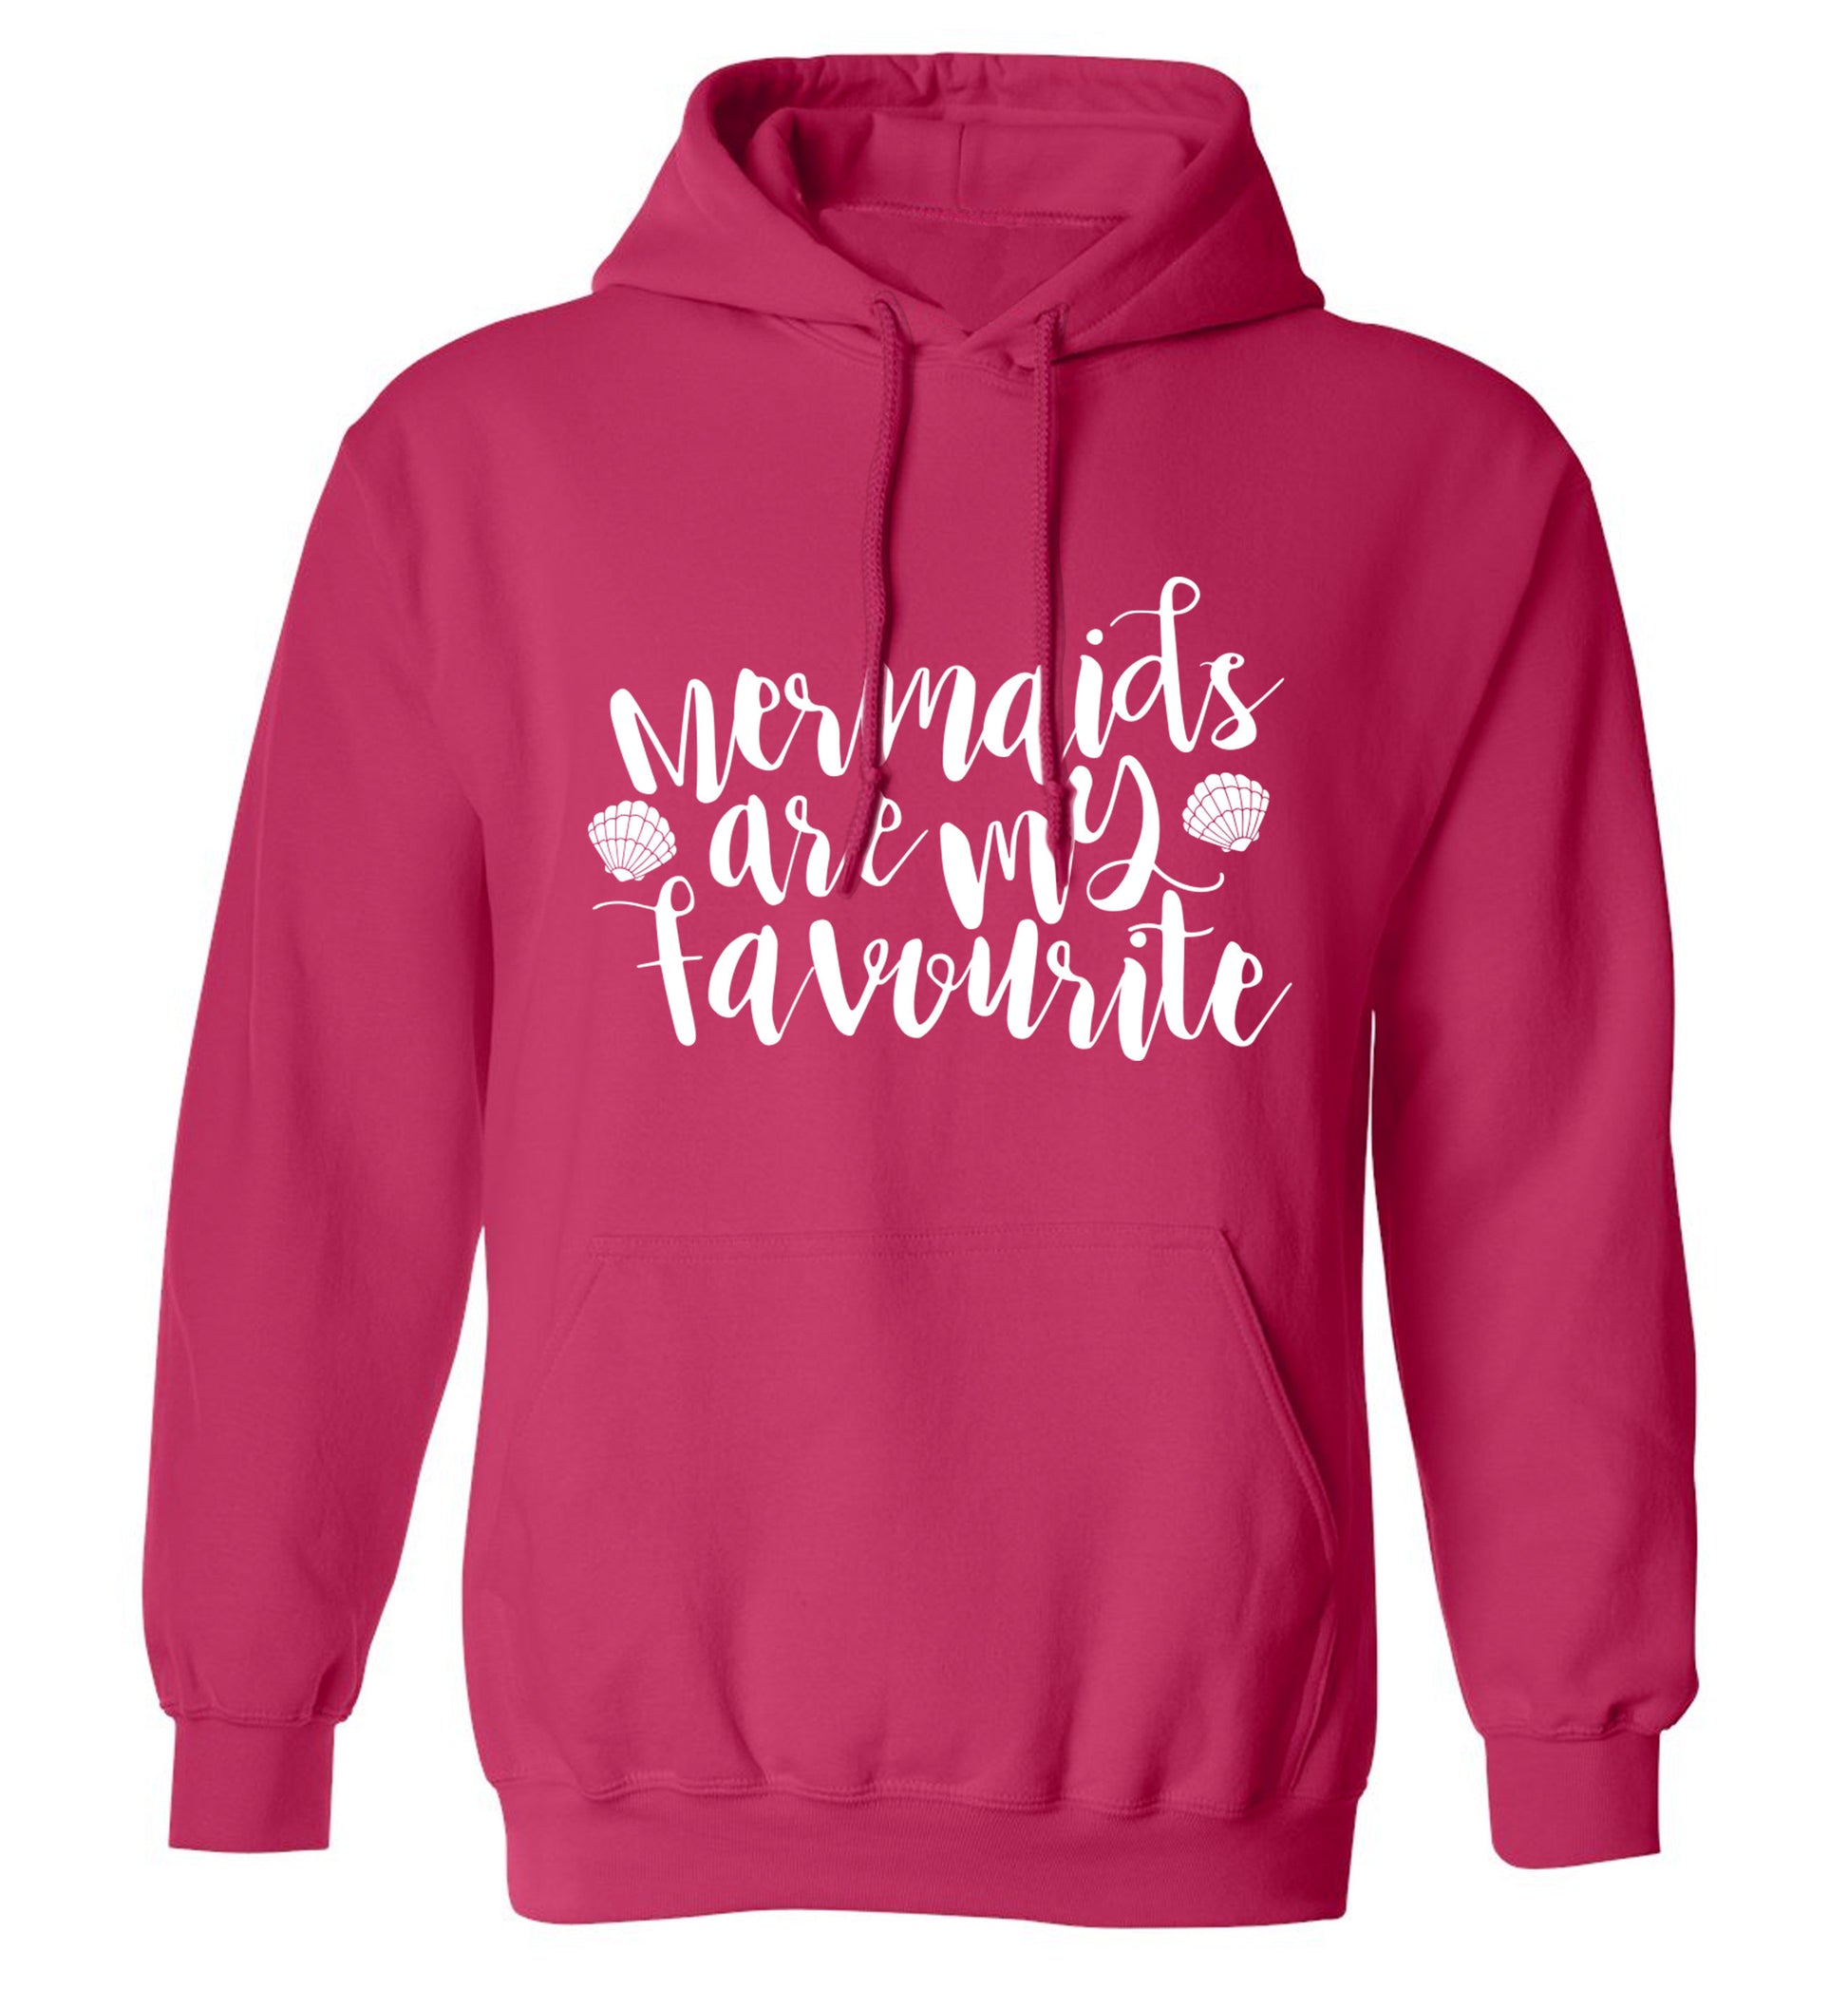 Mermaids are my favourite adults unisex pink hoodie 2XL